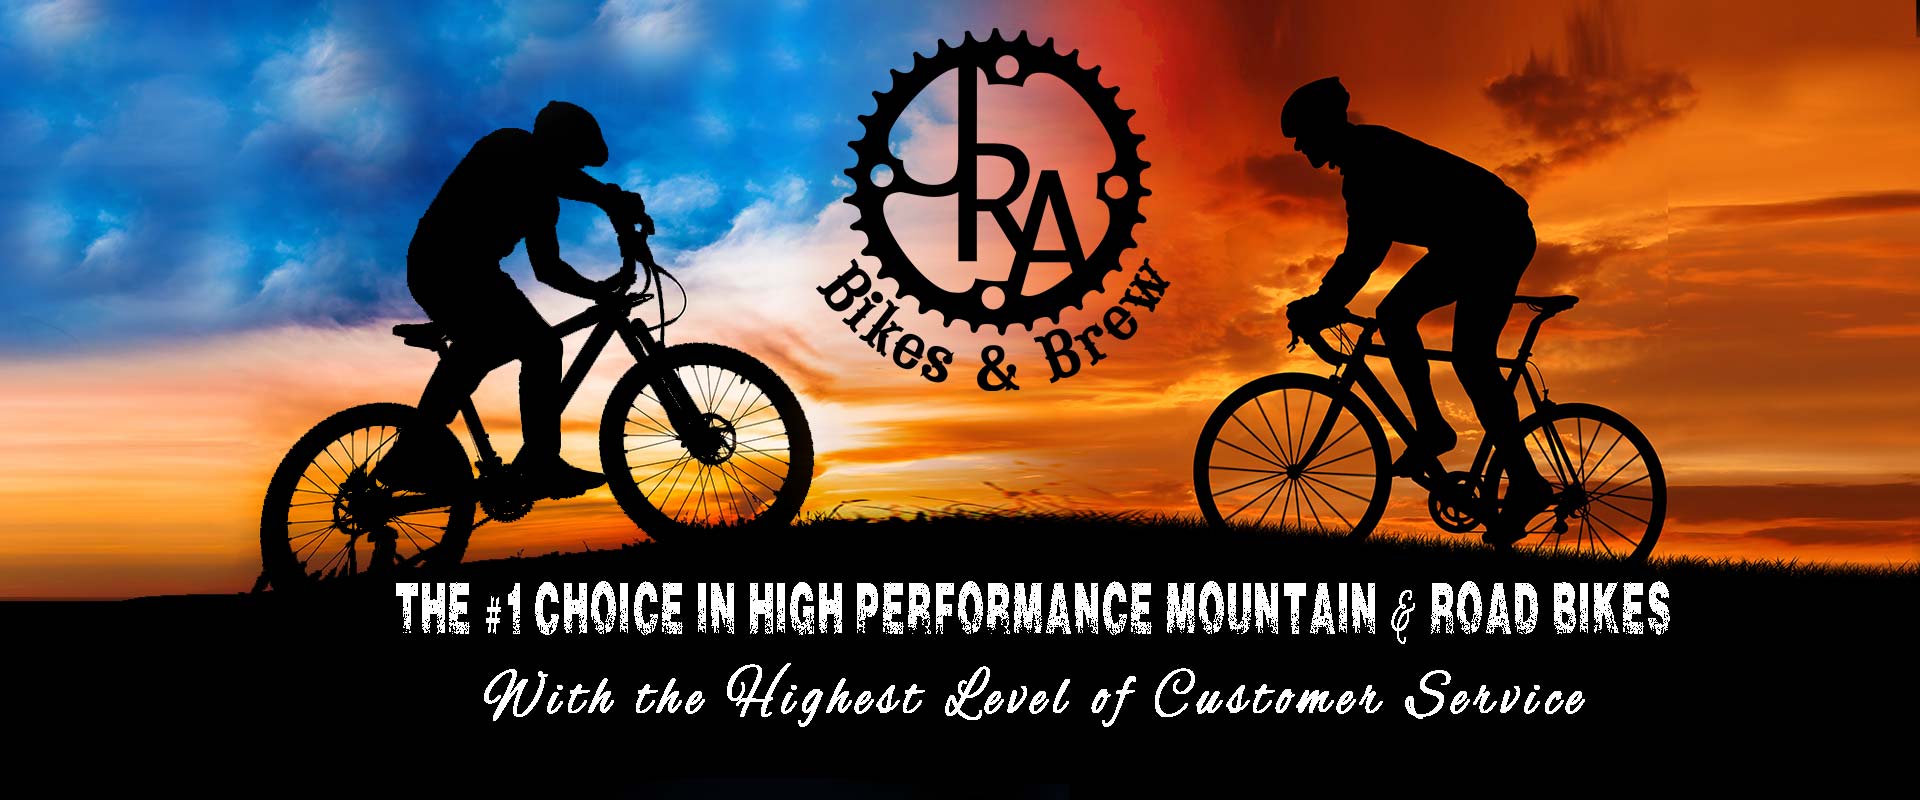 home-page-banner-3 | Mountain Bike and Road Bike Shop-Store in Ventura ...